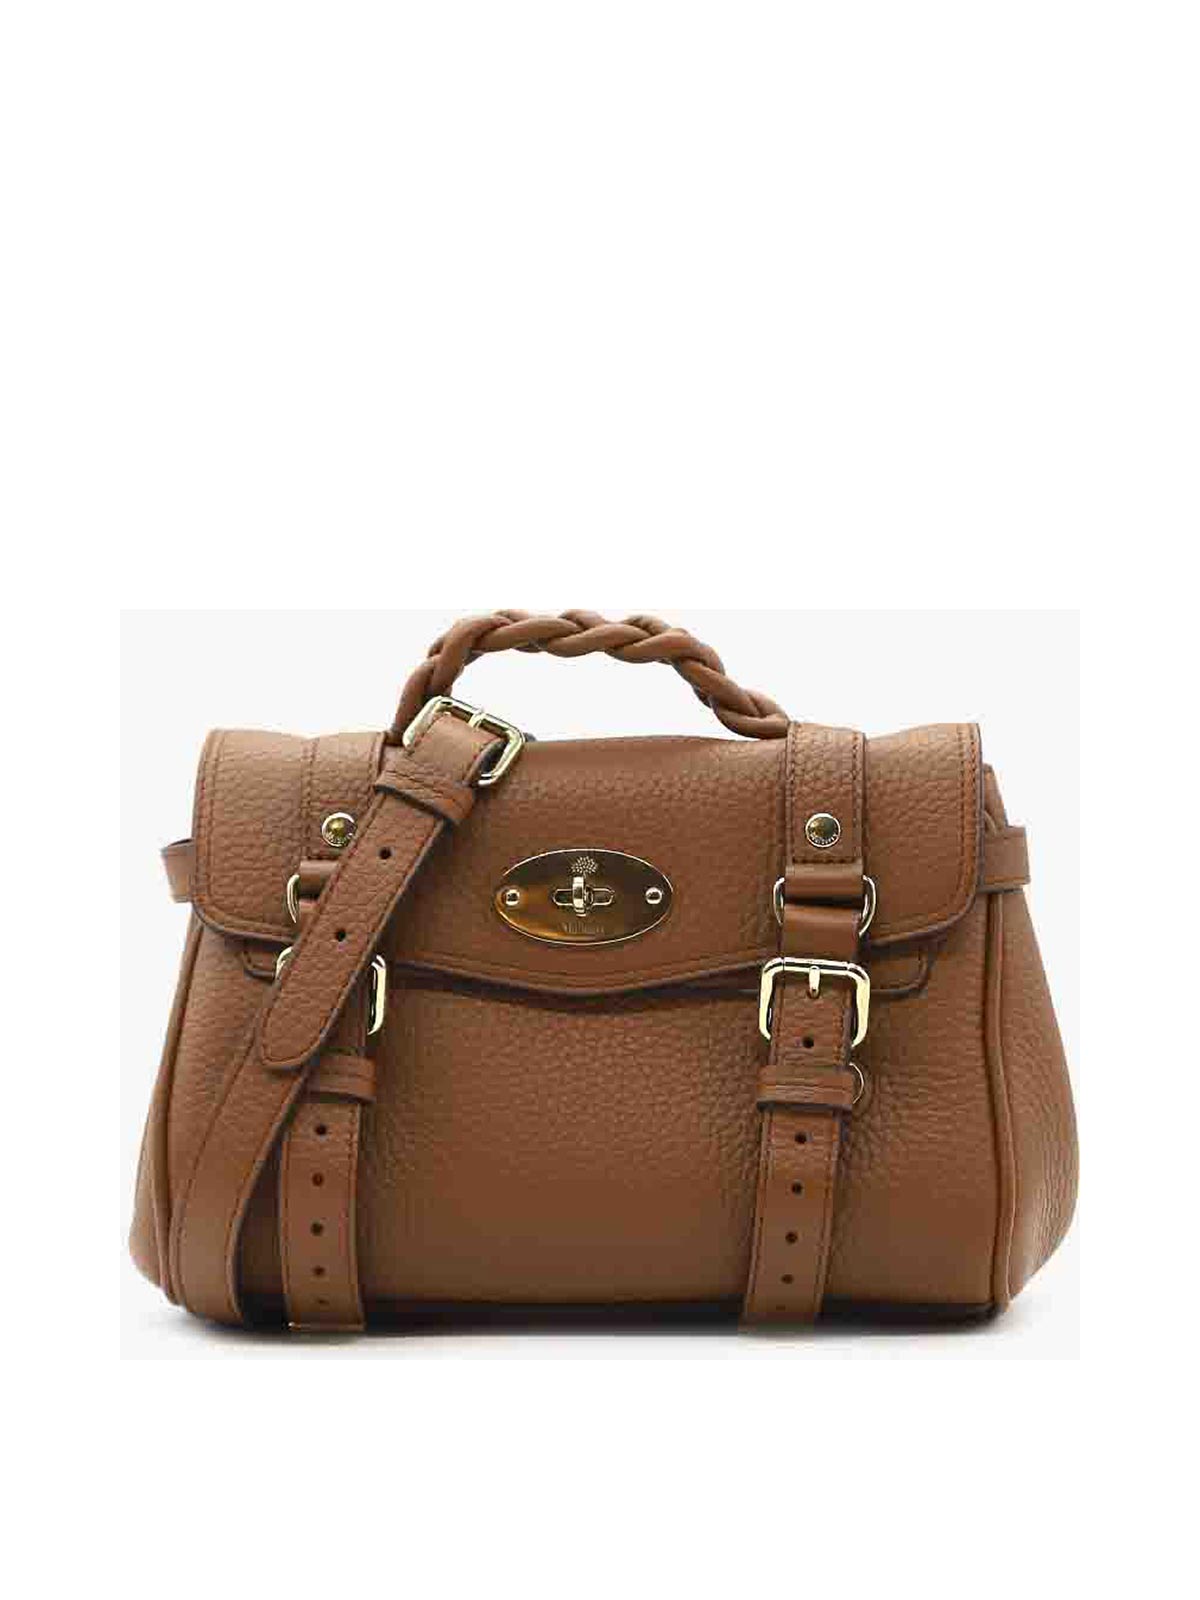 Mulberry Mini Alexa Leather Shoulder Bag In Brown